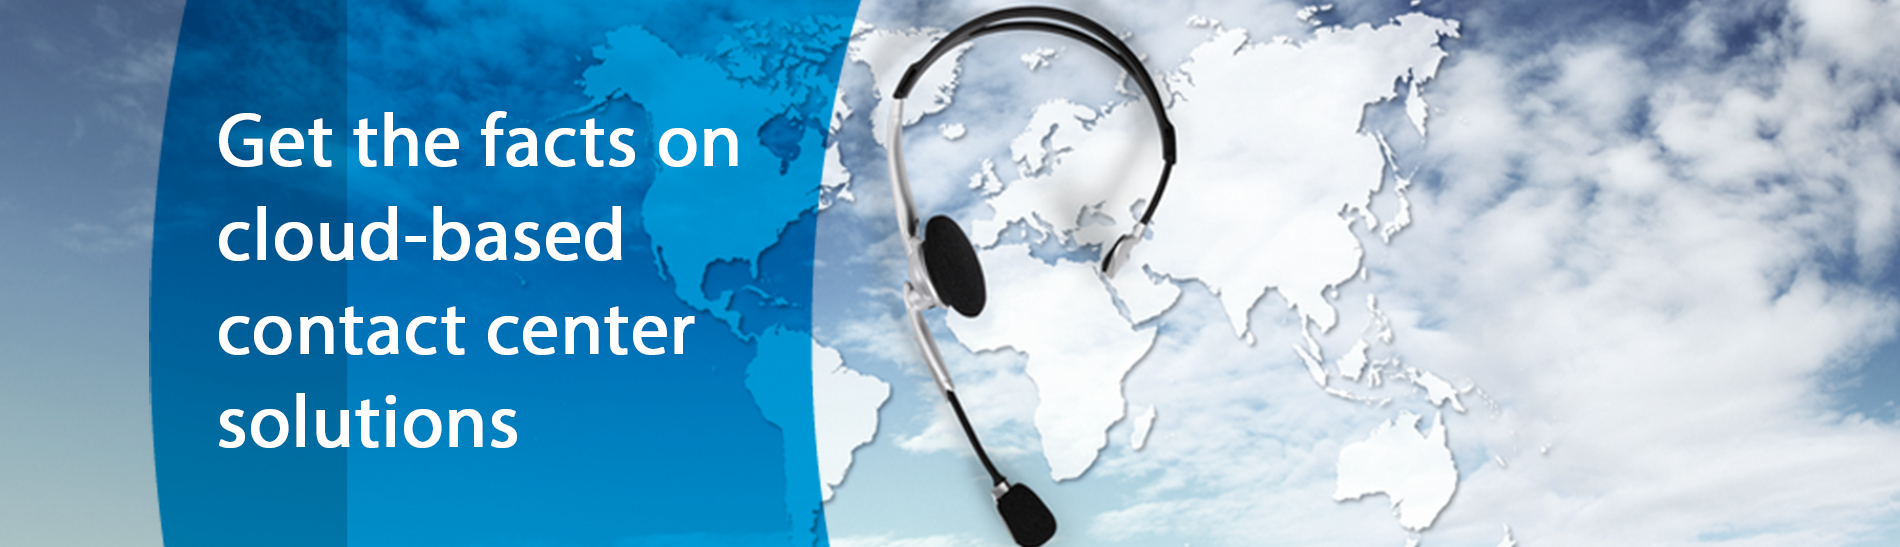 BannerLP-Get-the-facts-on-cloud-based-contact-center-solutions.jpg